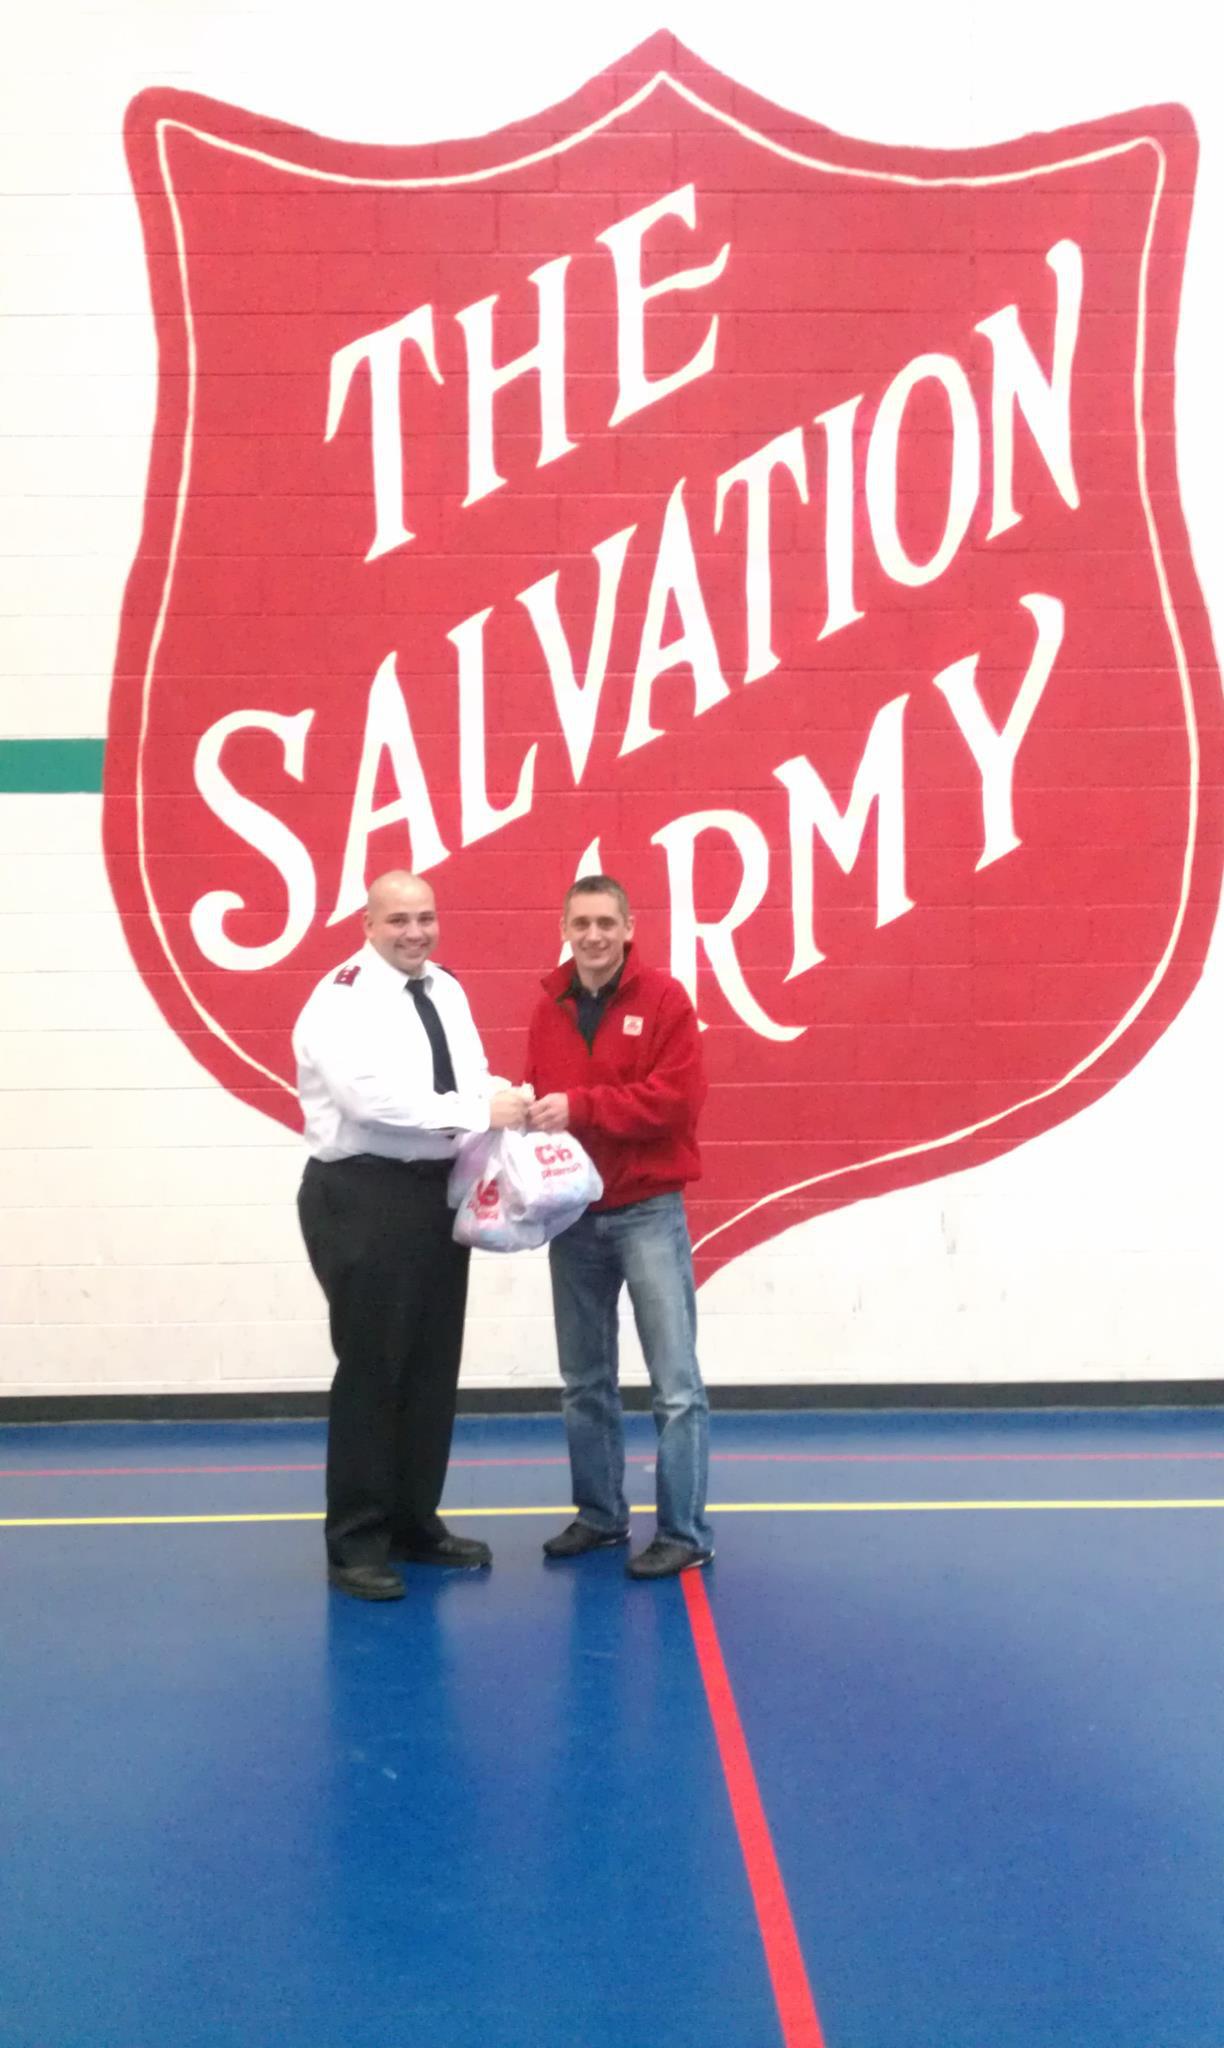 We support the Salvation Army